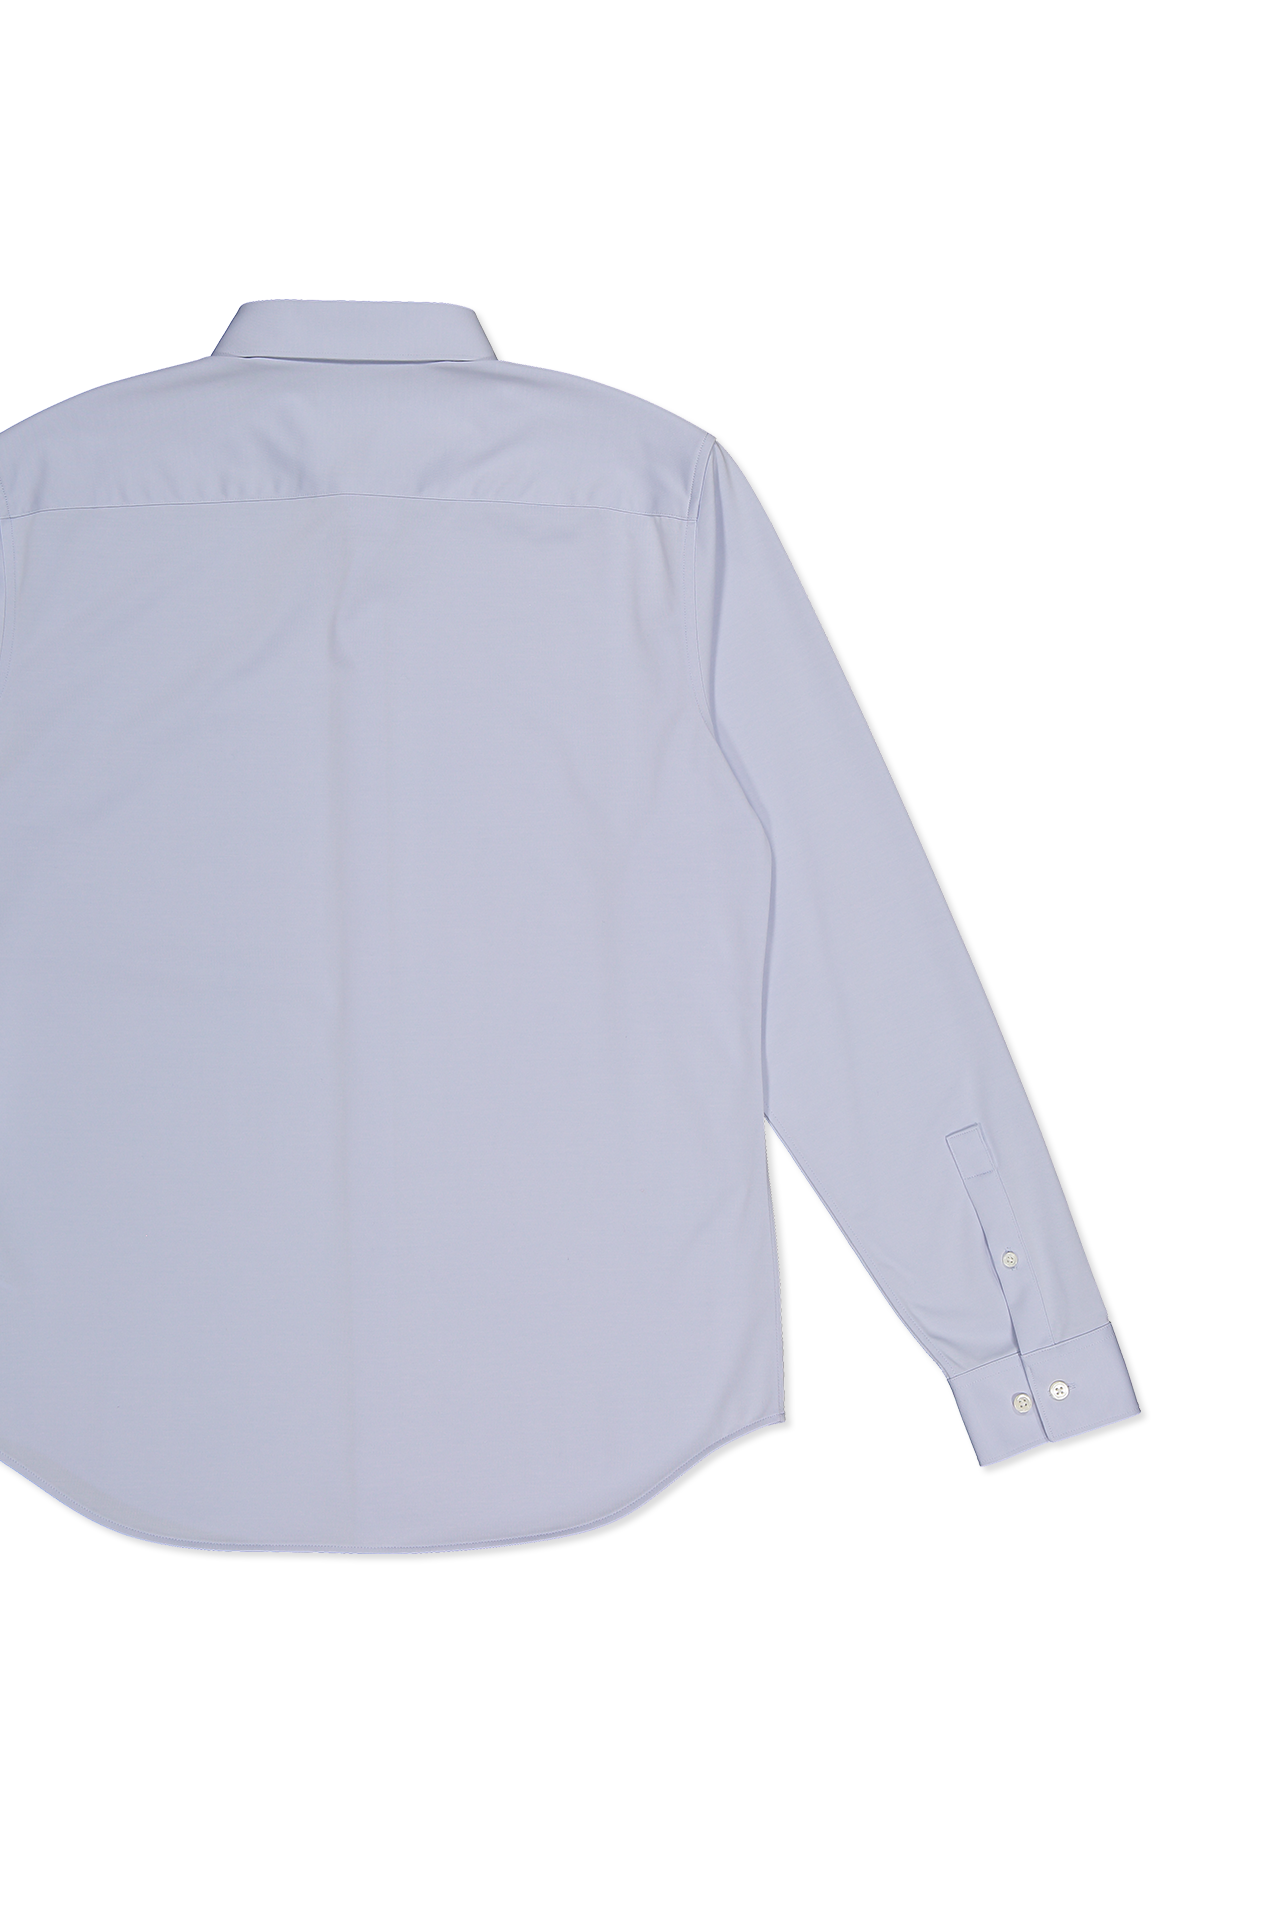 Slyvan Structure Shirt (7145028747379)